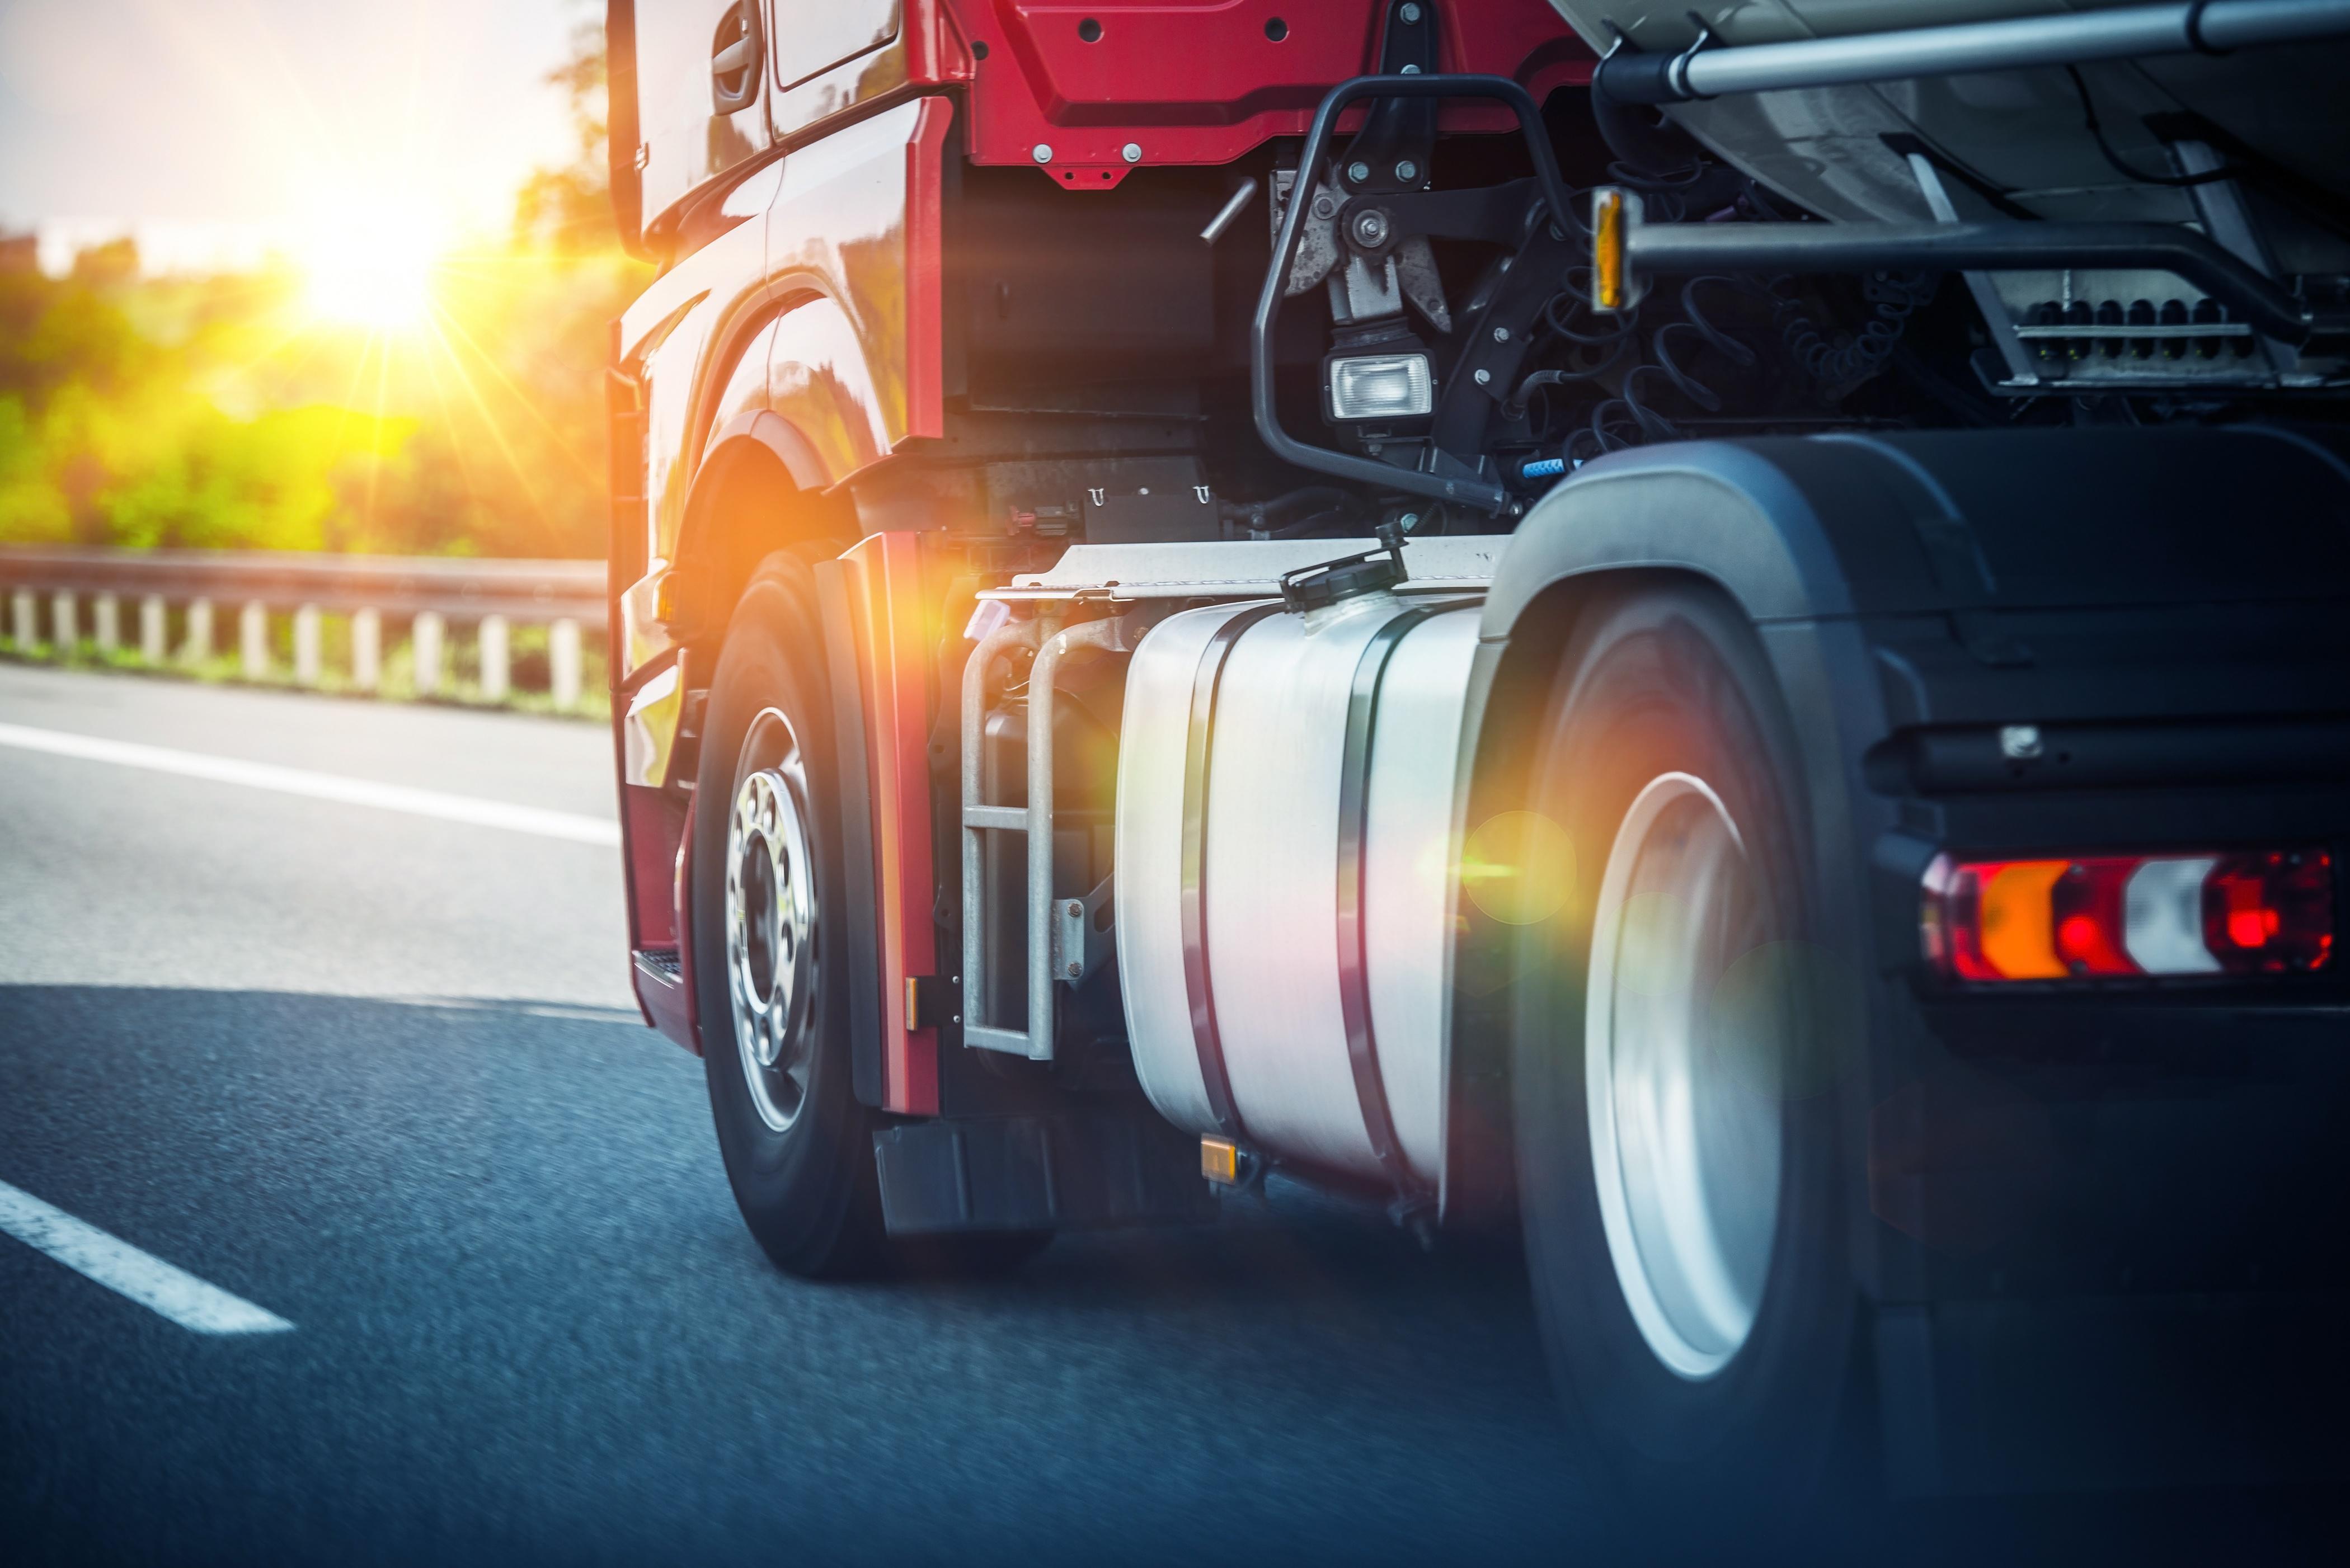 Total lubricants provide optimal engine protection for your commercial vehicles